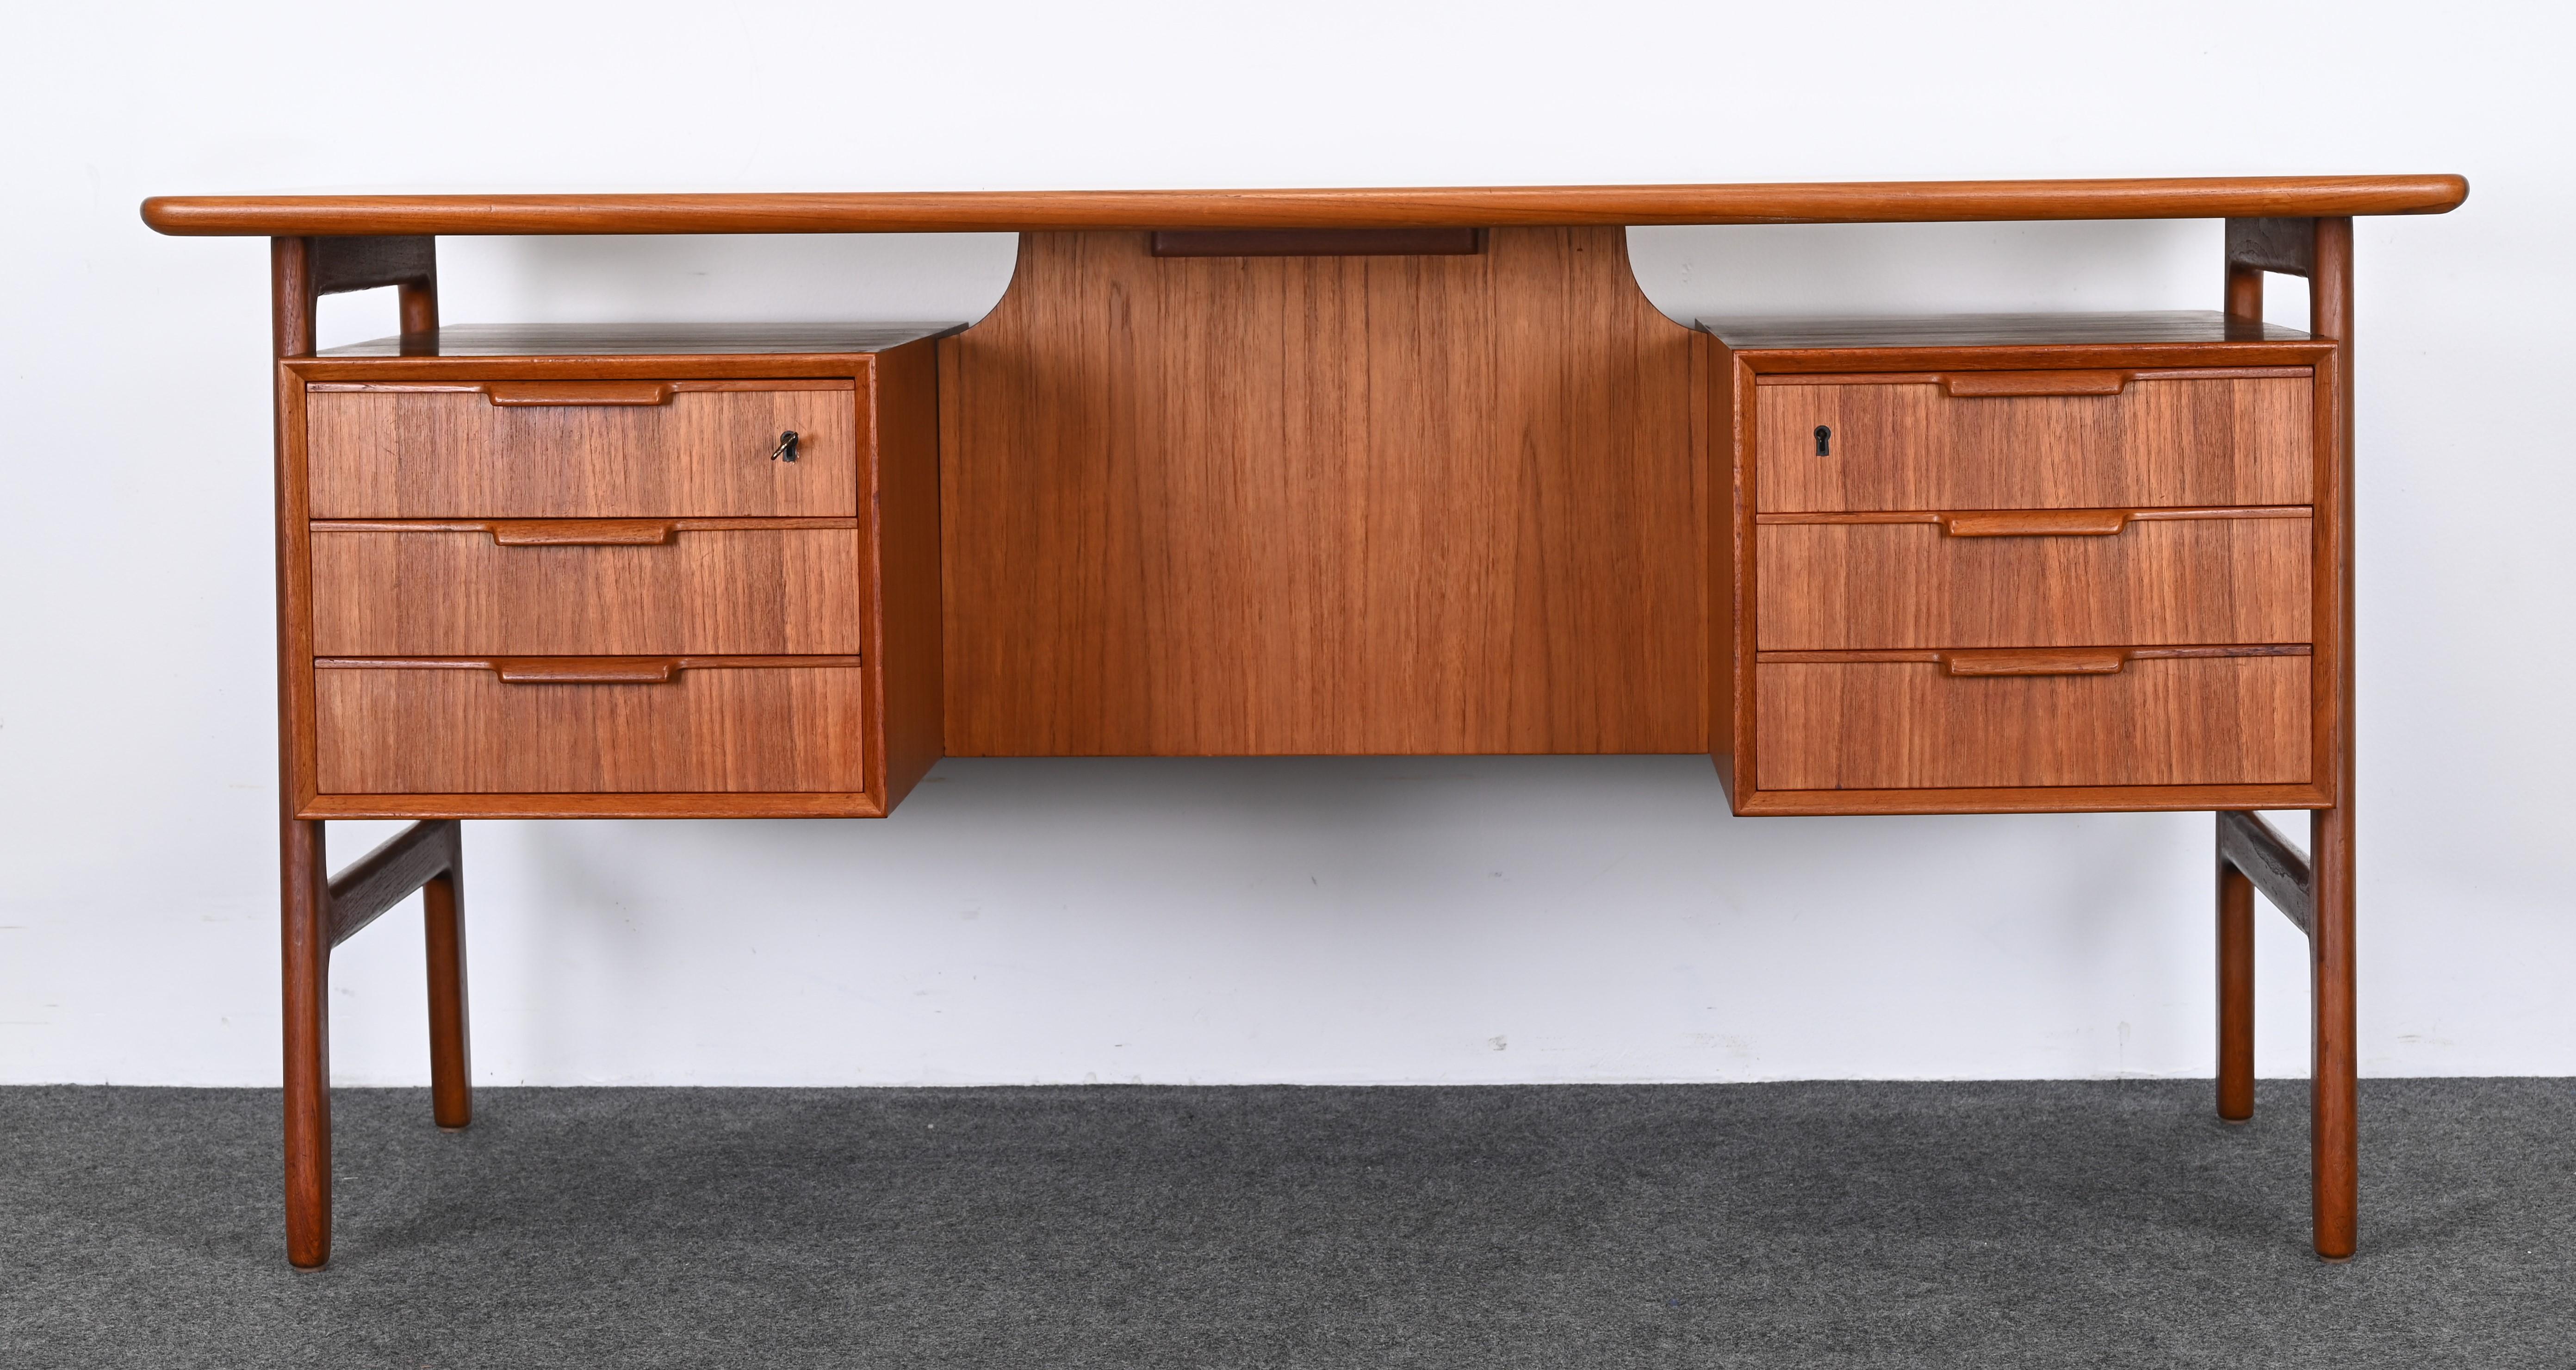 A sculptural Mid-Century Modern Danish teak desk designed by Gunni Omann for Omann Jun Mobilfabrik, 1960s. This Scandinavian desk has great design and proportions, as well as functionality with ample storage. Would work well in an apartment or any